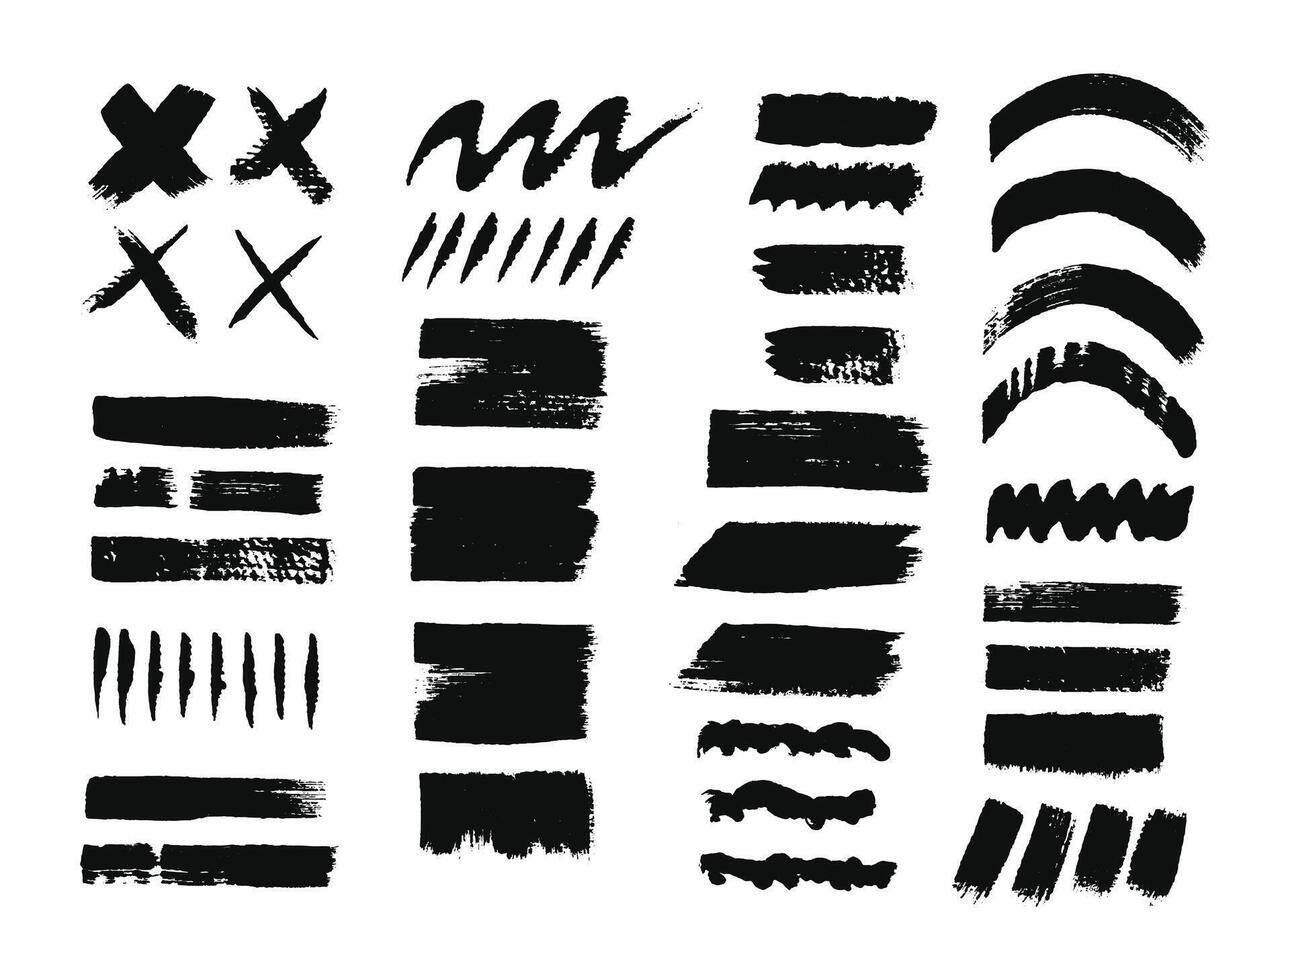 Black grunge paint brush strokes design set. Abstract lines and color block element template bundle. For painting illustration. vector